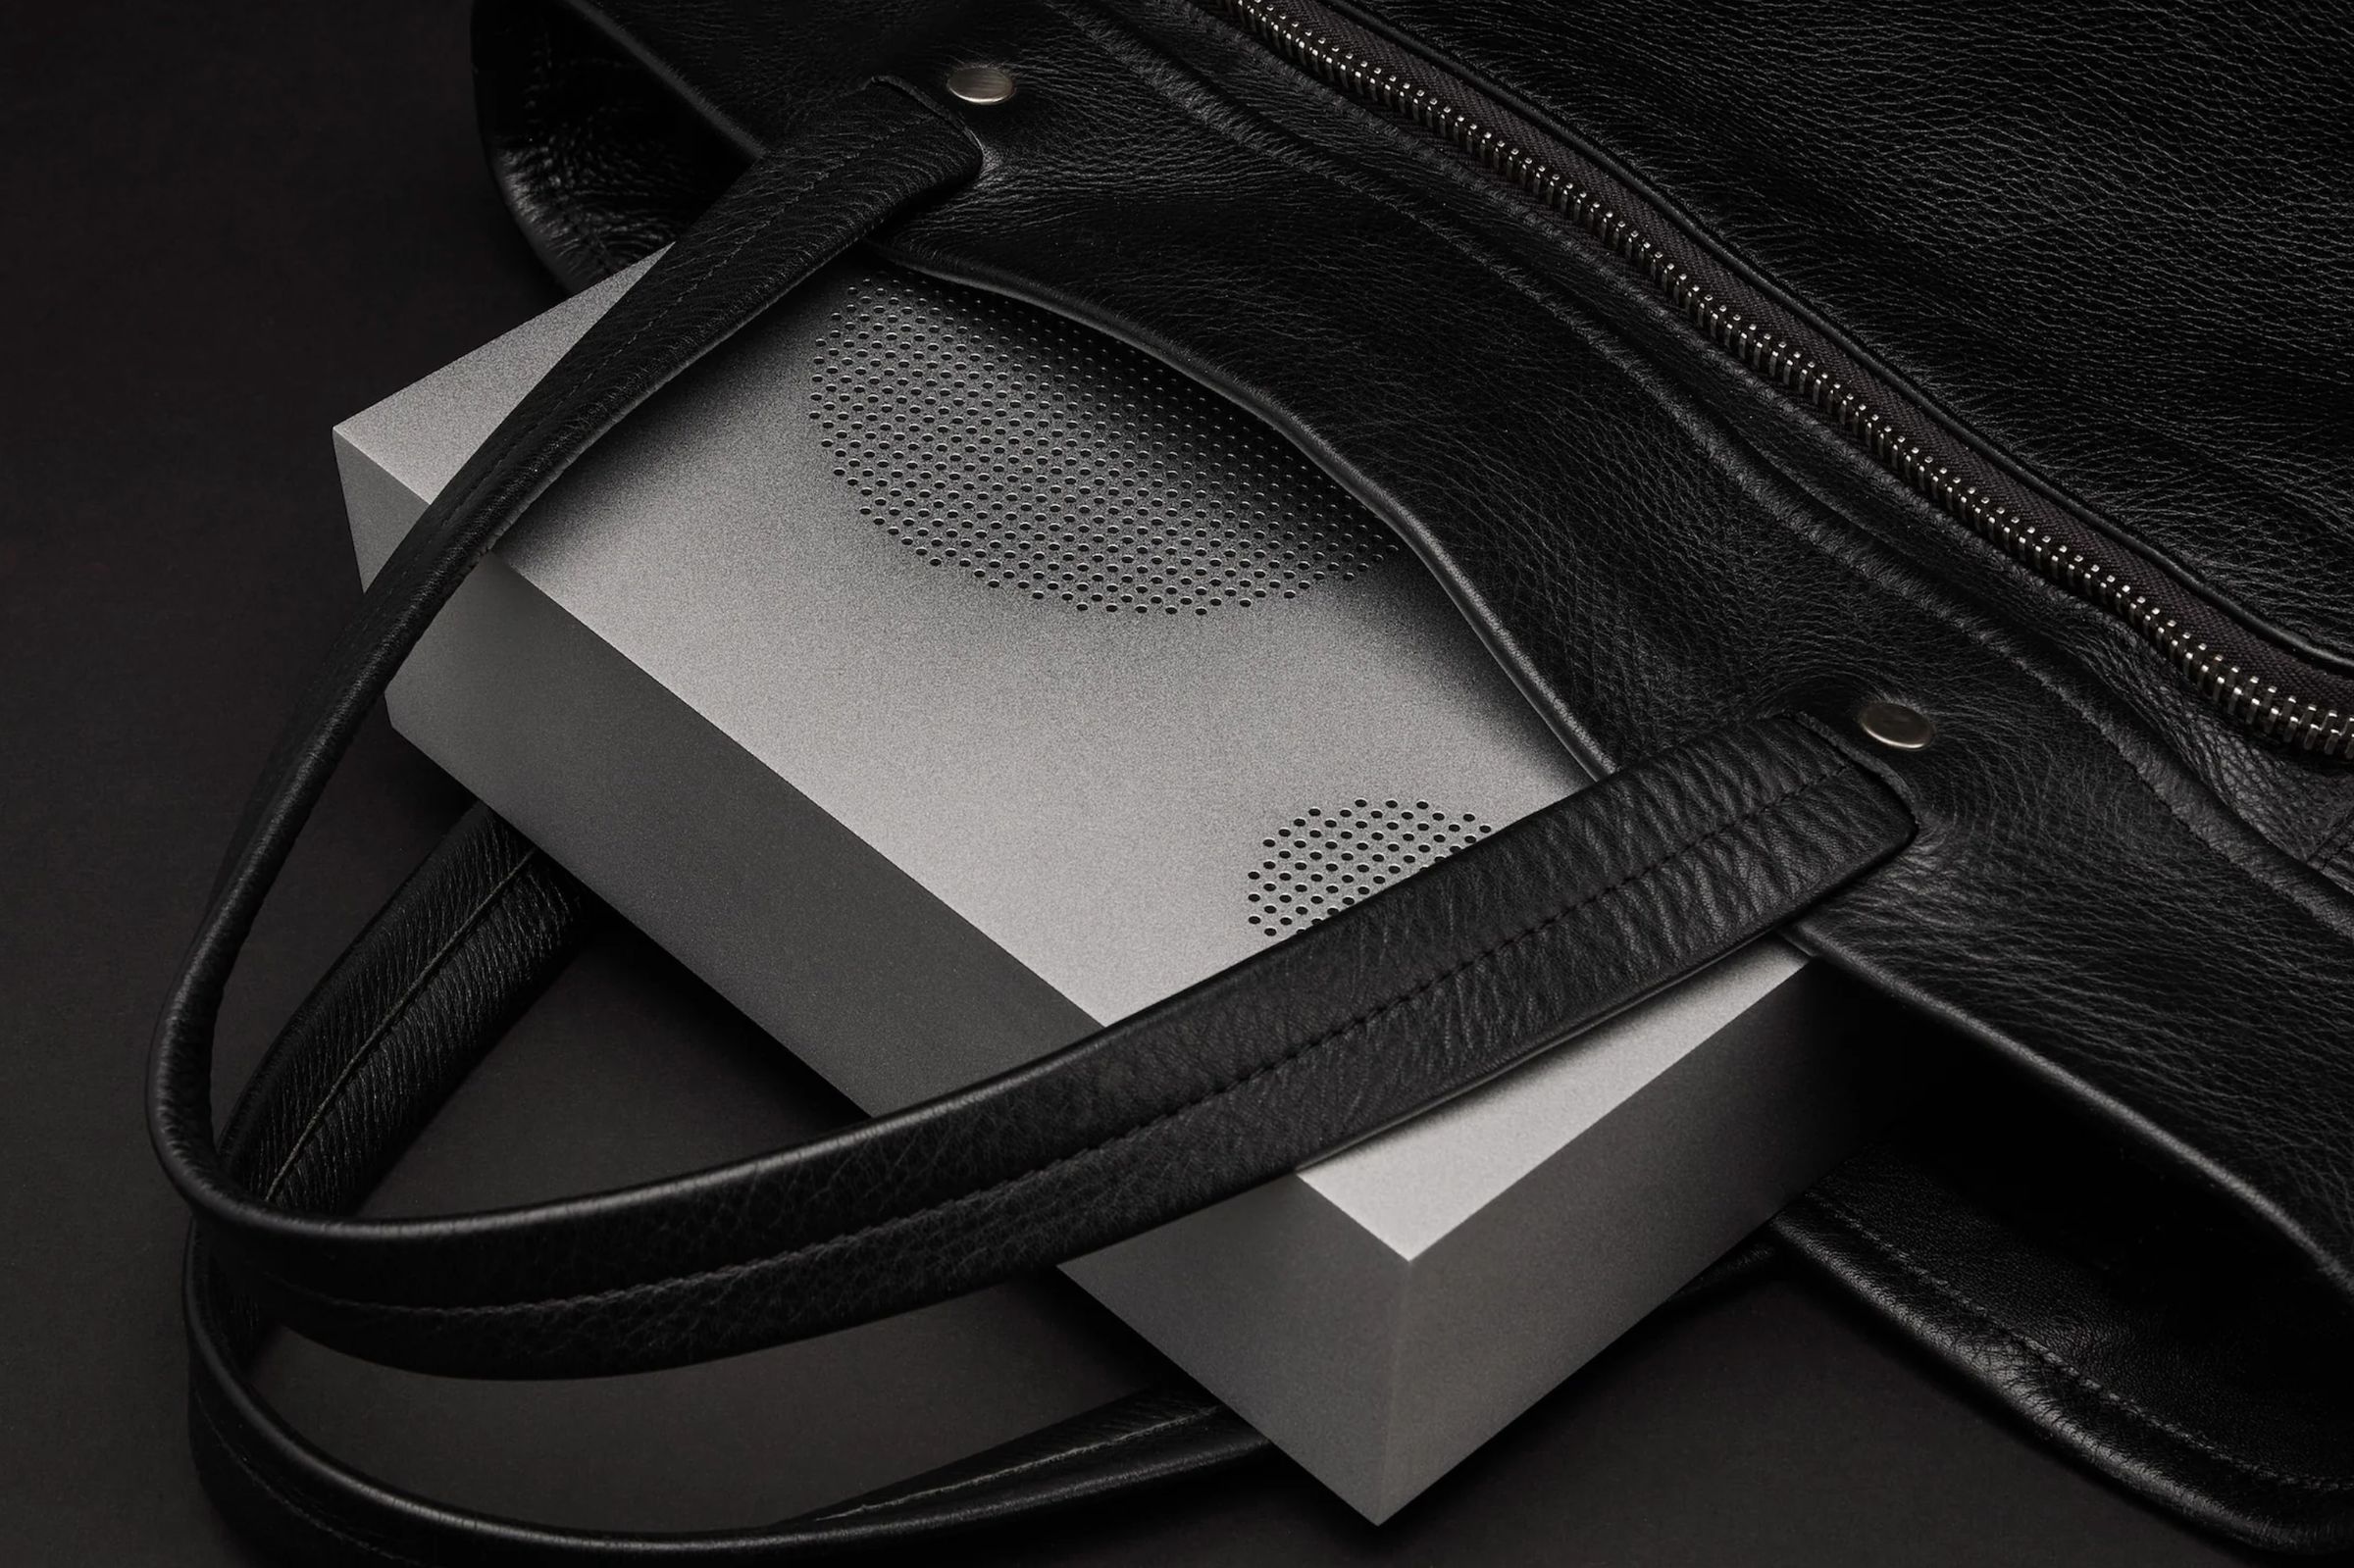 The all-metal Nocs Labs Monolith x Aluminum speaker in a silver finish half inserted into a bag.